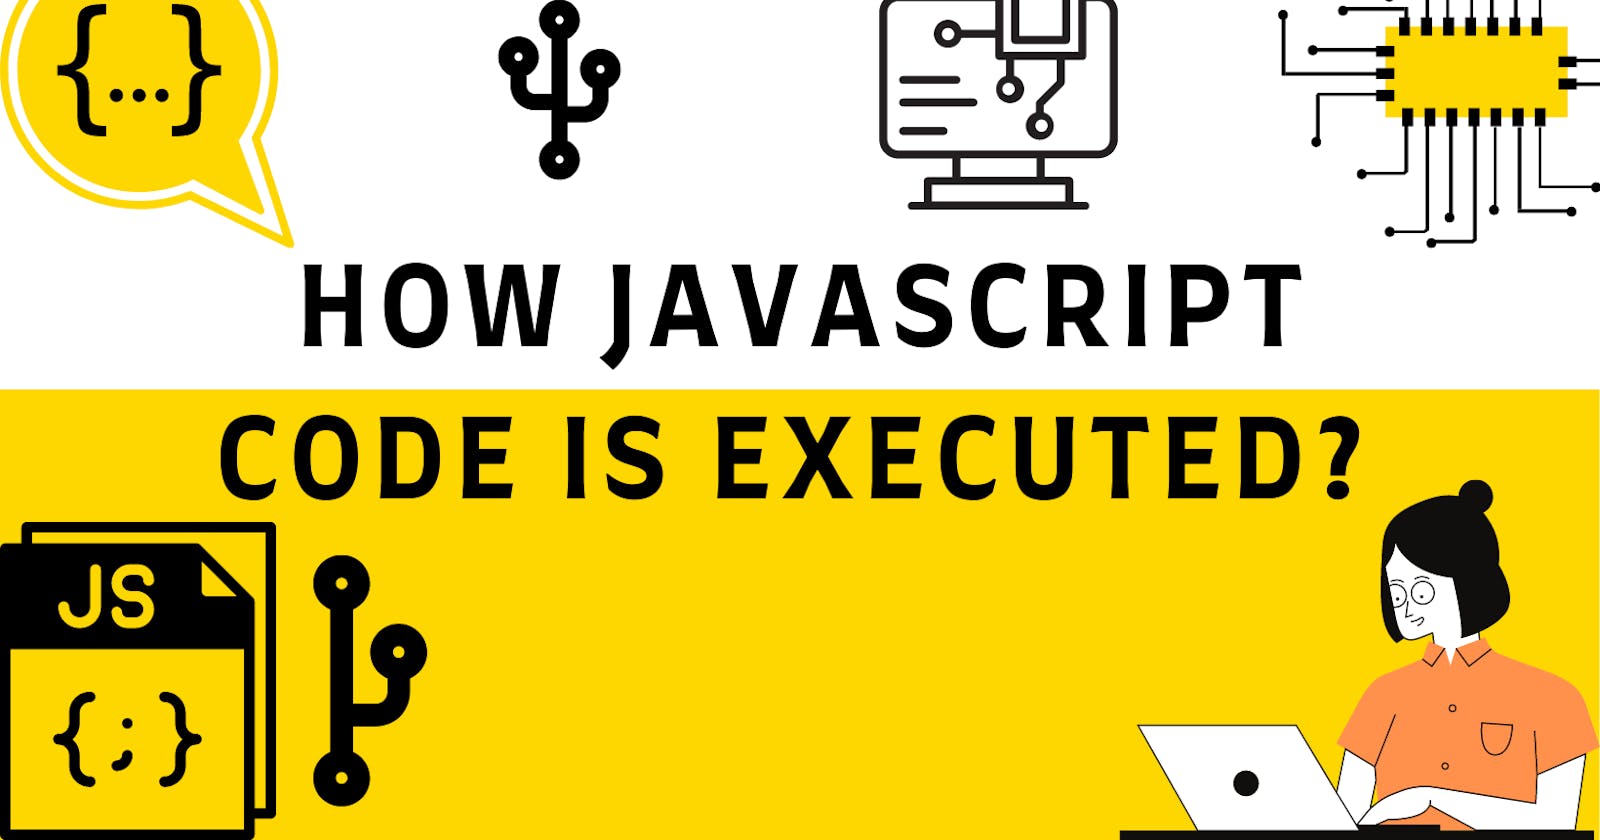 How JavaScript code is executed? 🤔